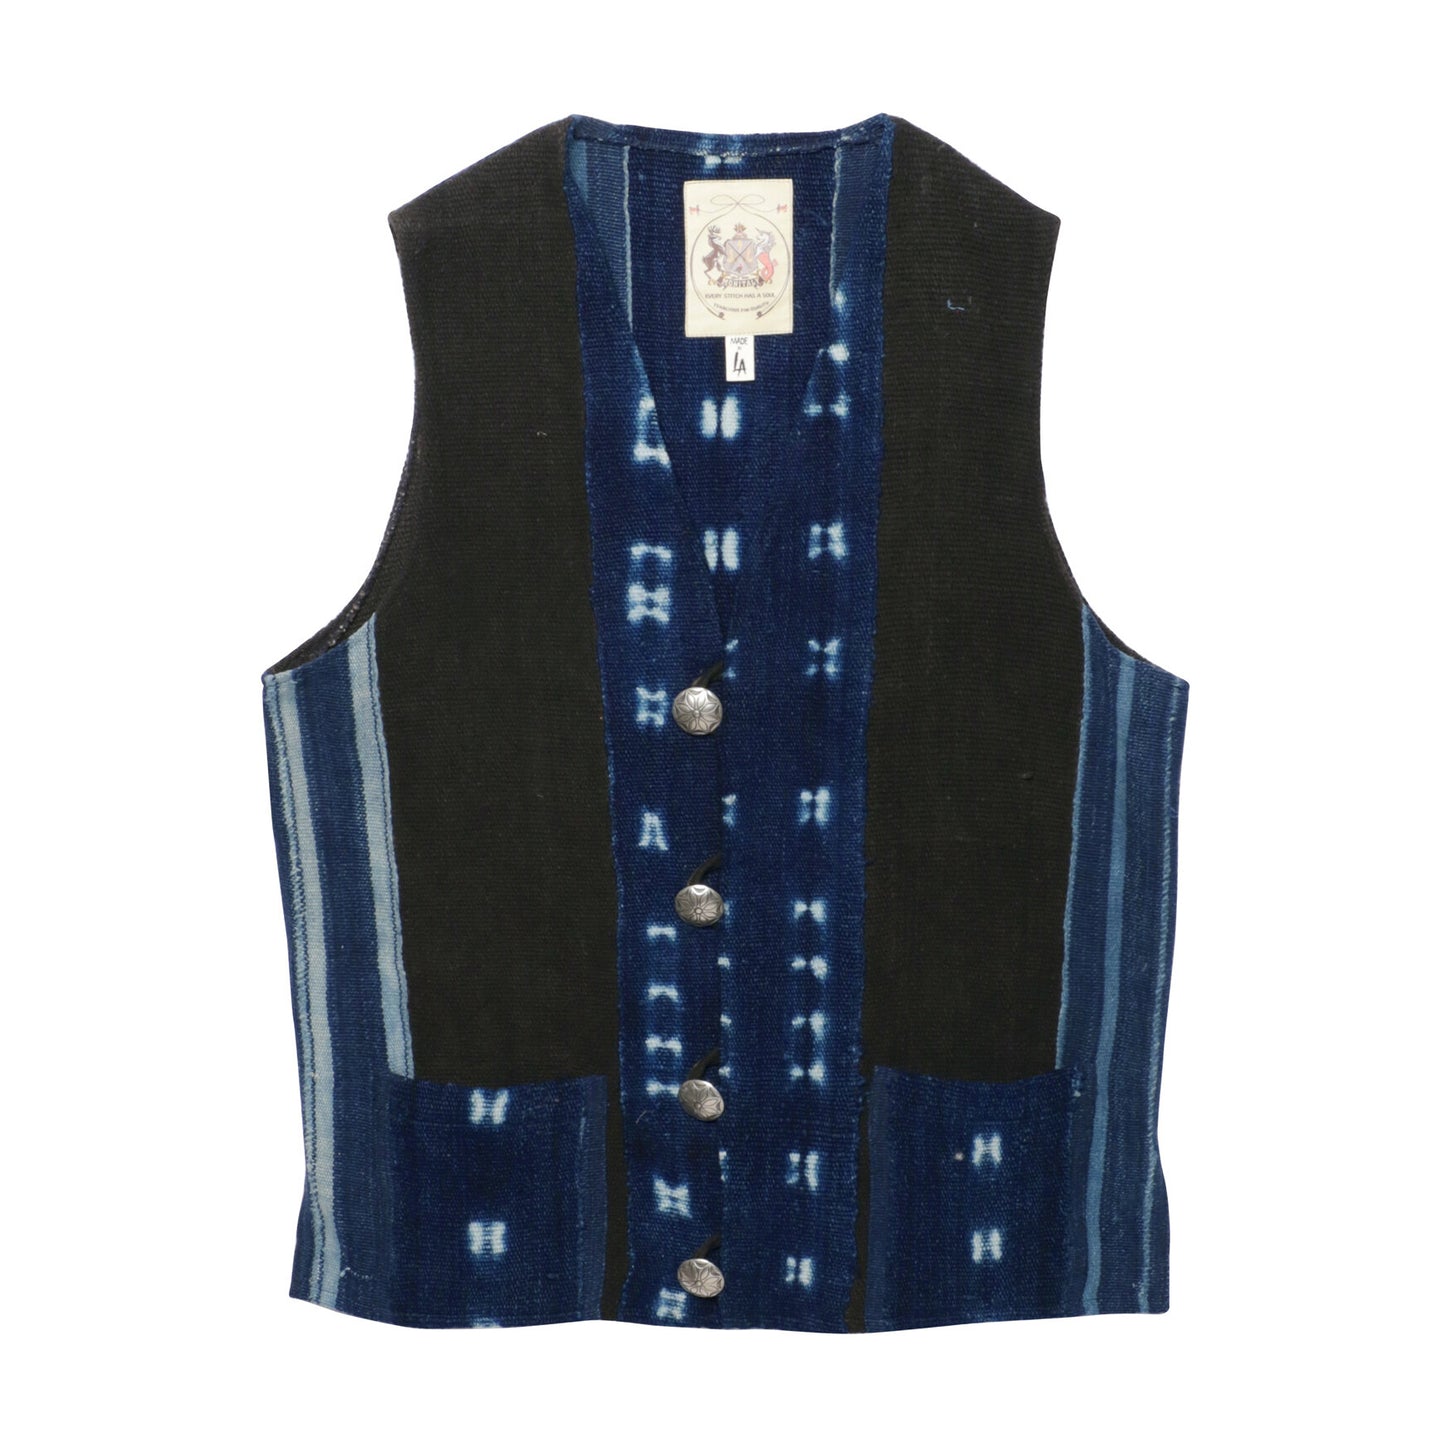 MONITALY M29101 NATIVE VEST - HANDWOVEN AFRICAN INDIGO CLOTH, CRAZY (ONE OF A KIND)